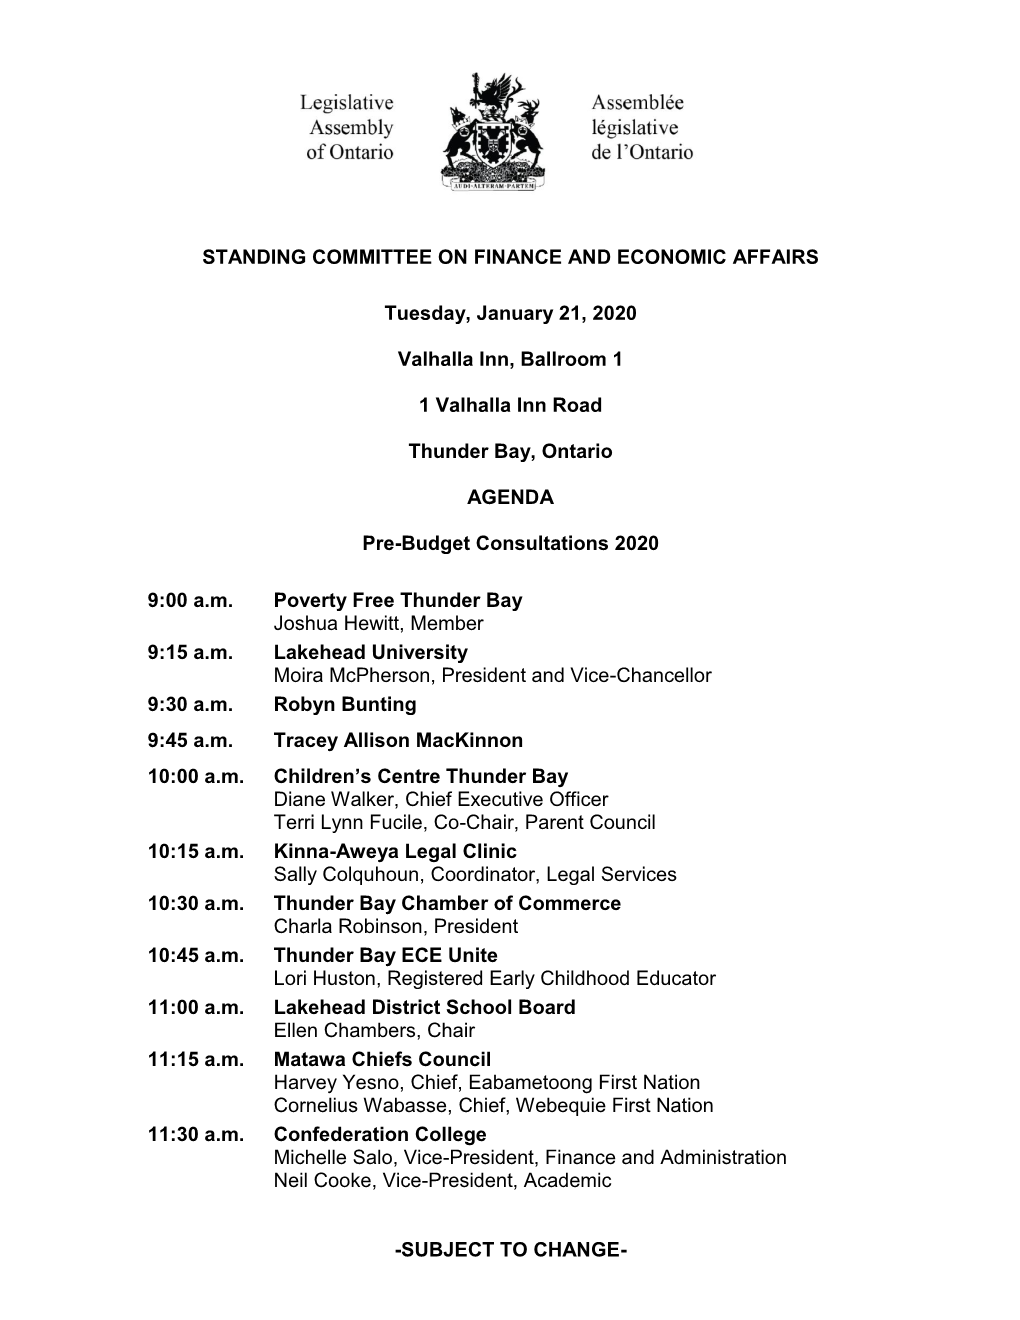 SUBJECT to CHANGE- STANDING COMMITTEE on FINANCE and ECONOMIC AFFAIRS Pre-Budget Consultations 2020 Tuesday, January 21, 2020 P